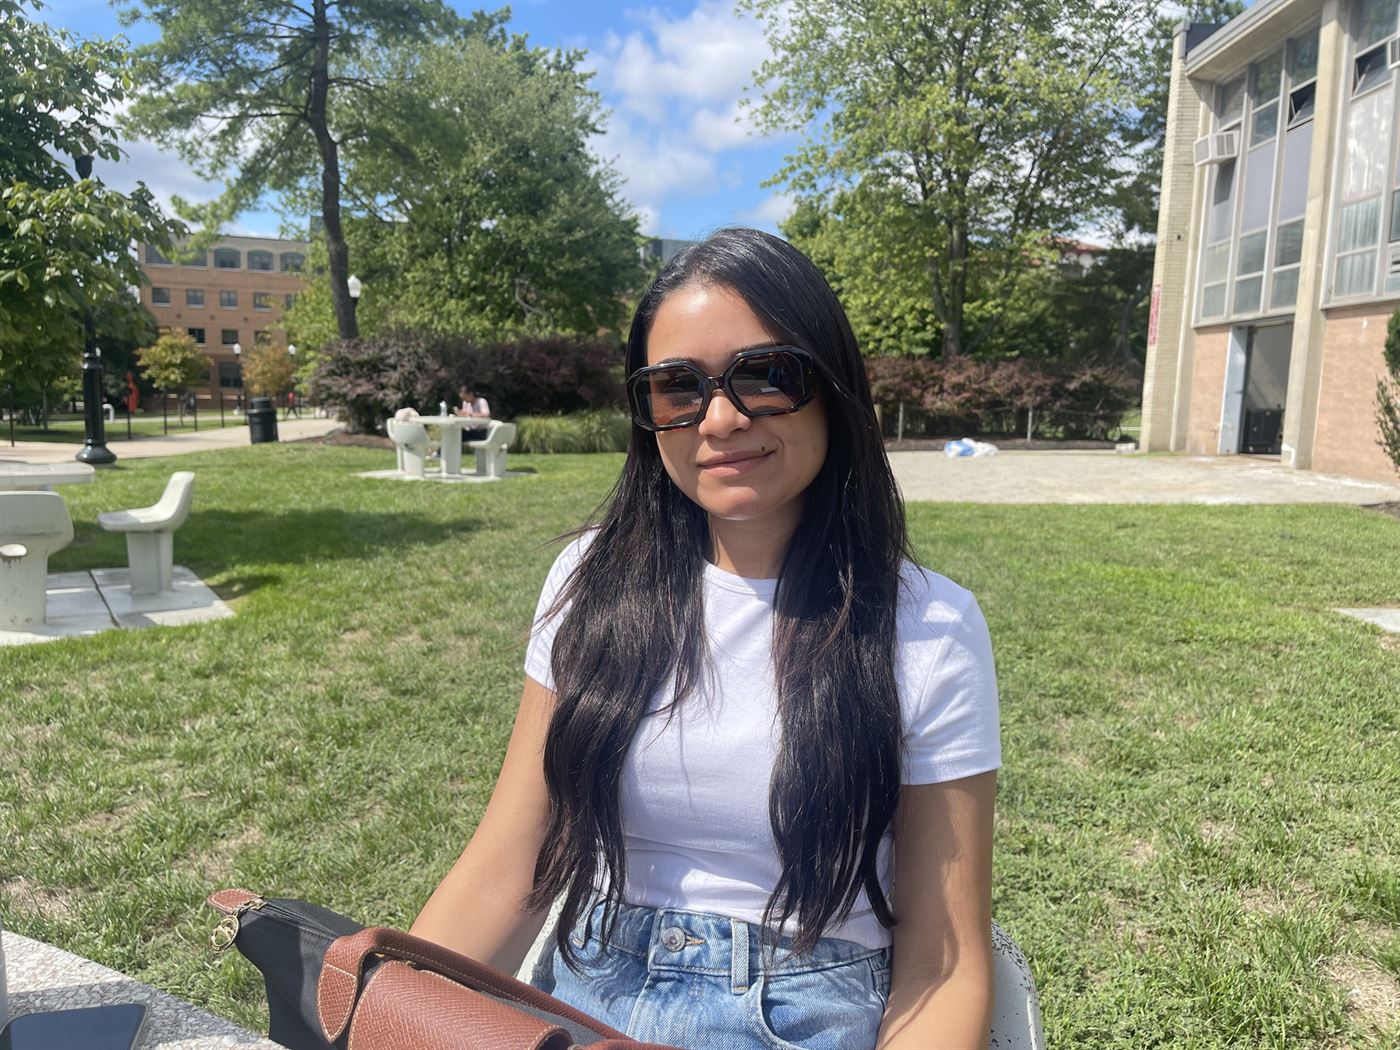 Ayah Zaza, a senior public relations major, says the parking issues on campus is getting out of control. Jennifer Portorreal | The Montclarion